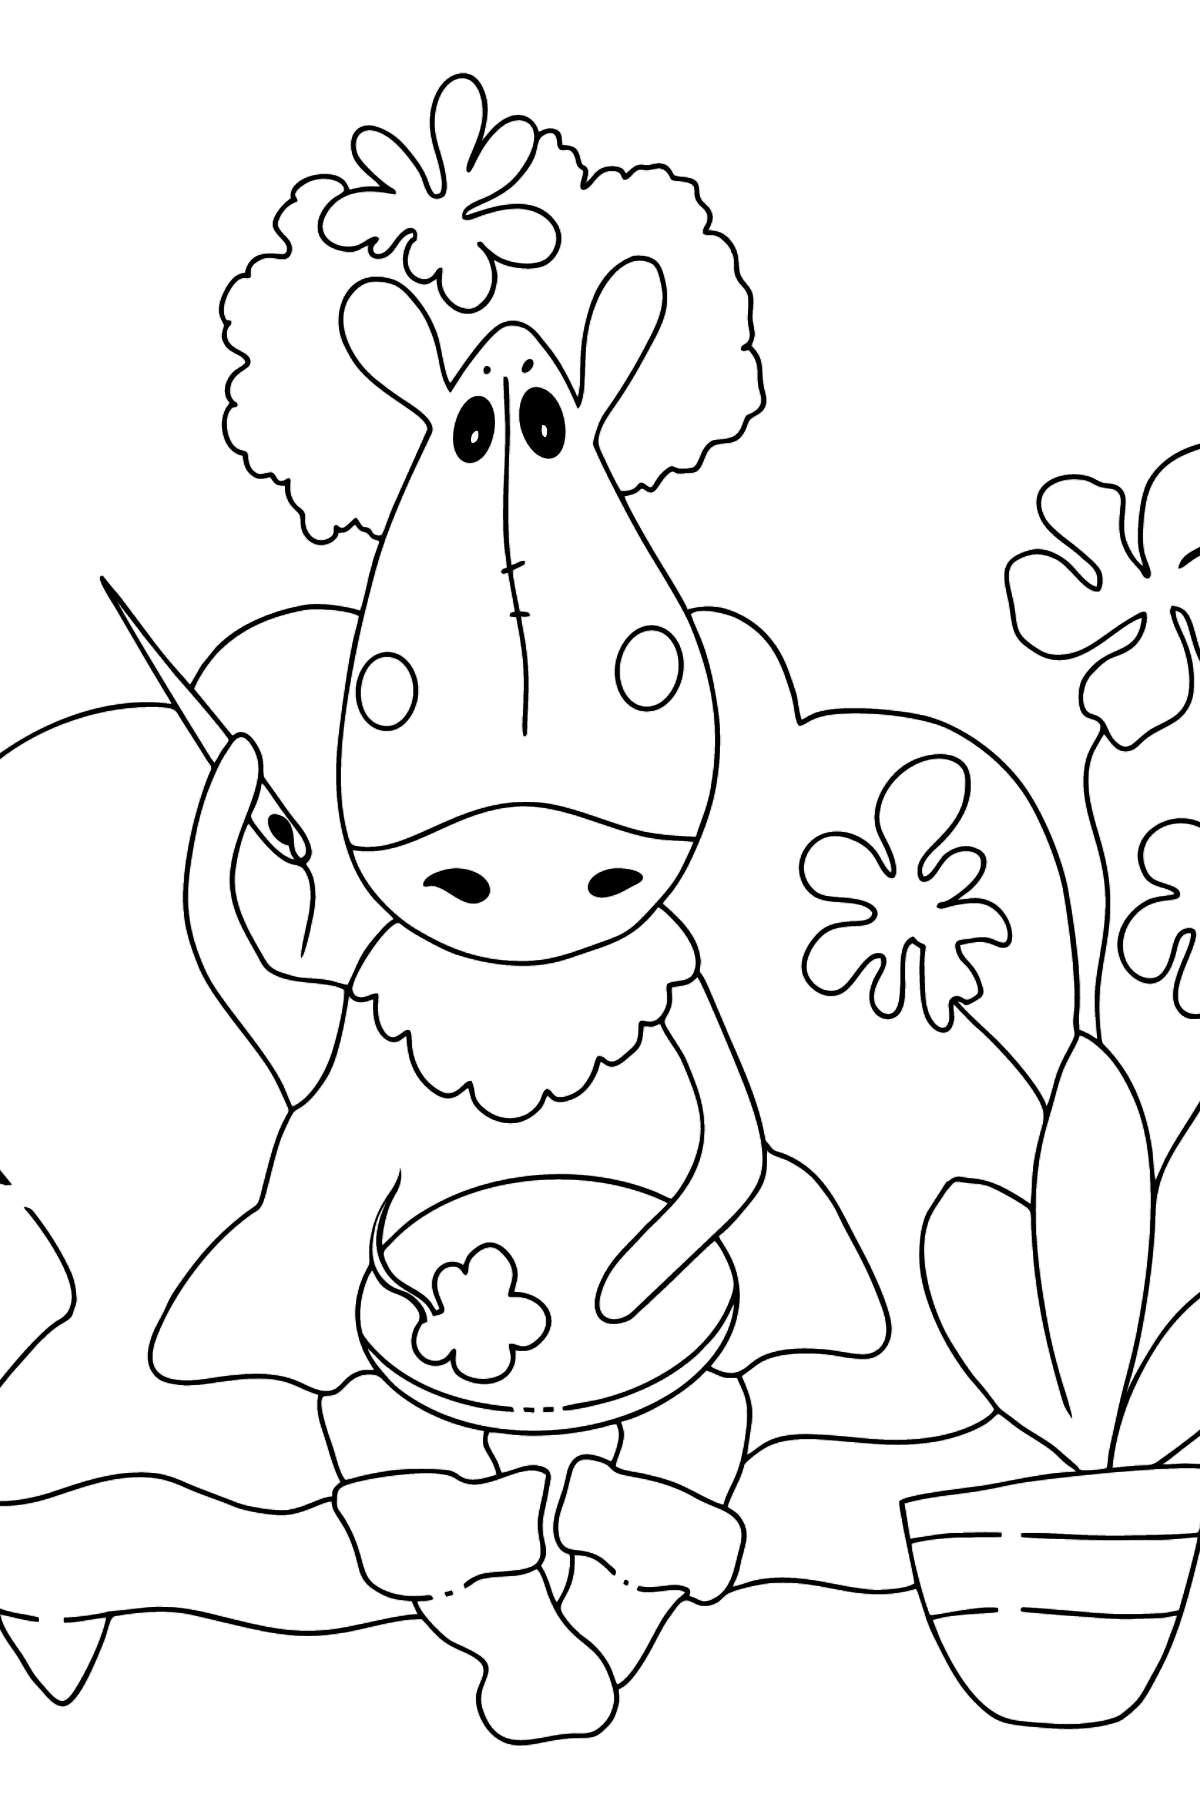 Coloring page a horse on the sofa - Coloring Pages for Kids